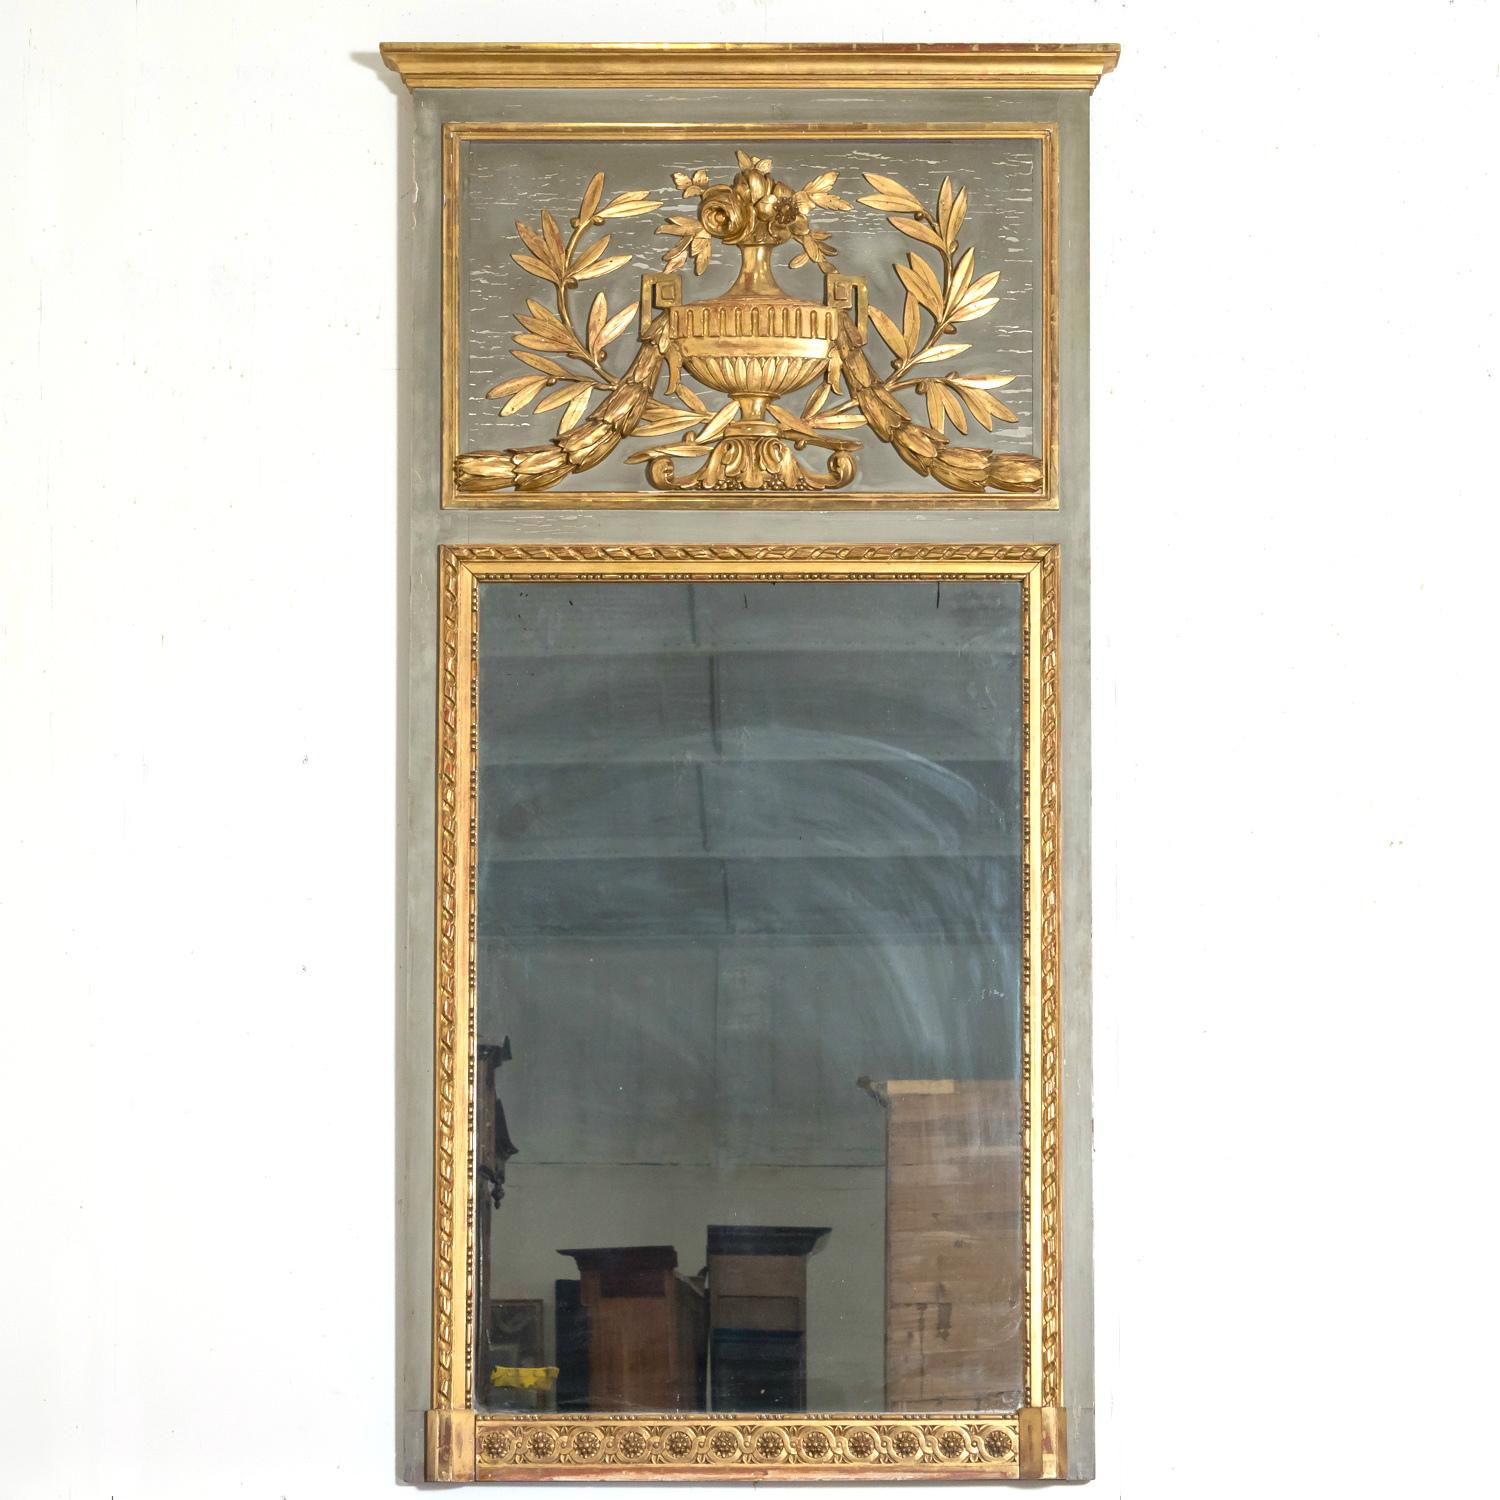 A 19th century French Louis XVI style painted and and parcel gilt trumeau mirror, circa 1870s. The greenish-gray patinated frame, adorned with neoclassical relief carvings, speaks to the attention to detail and craftsmanship of the era. The